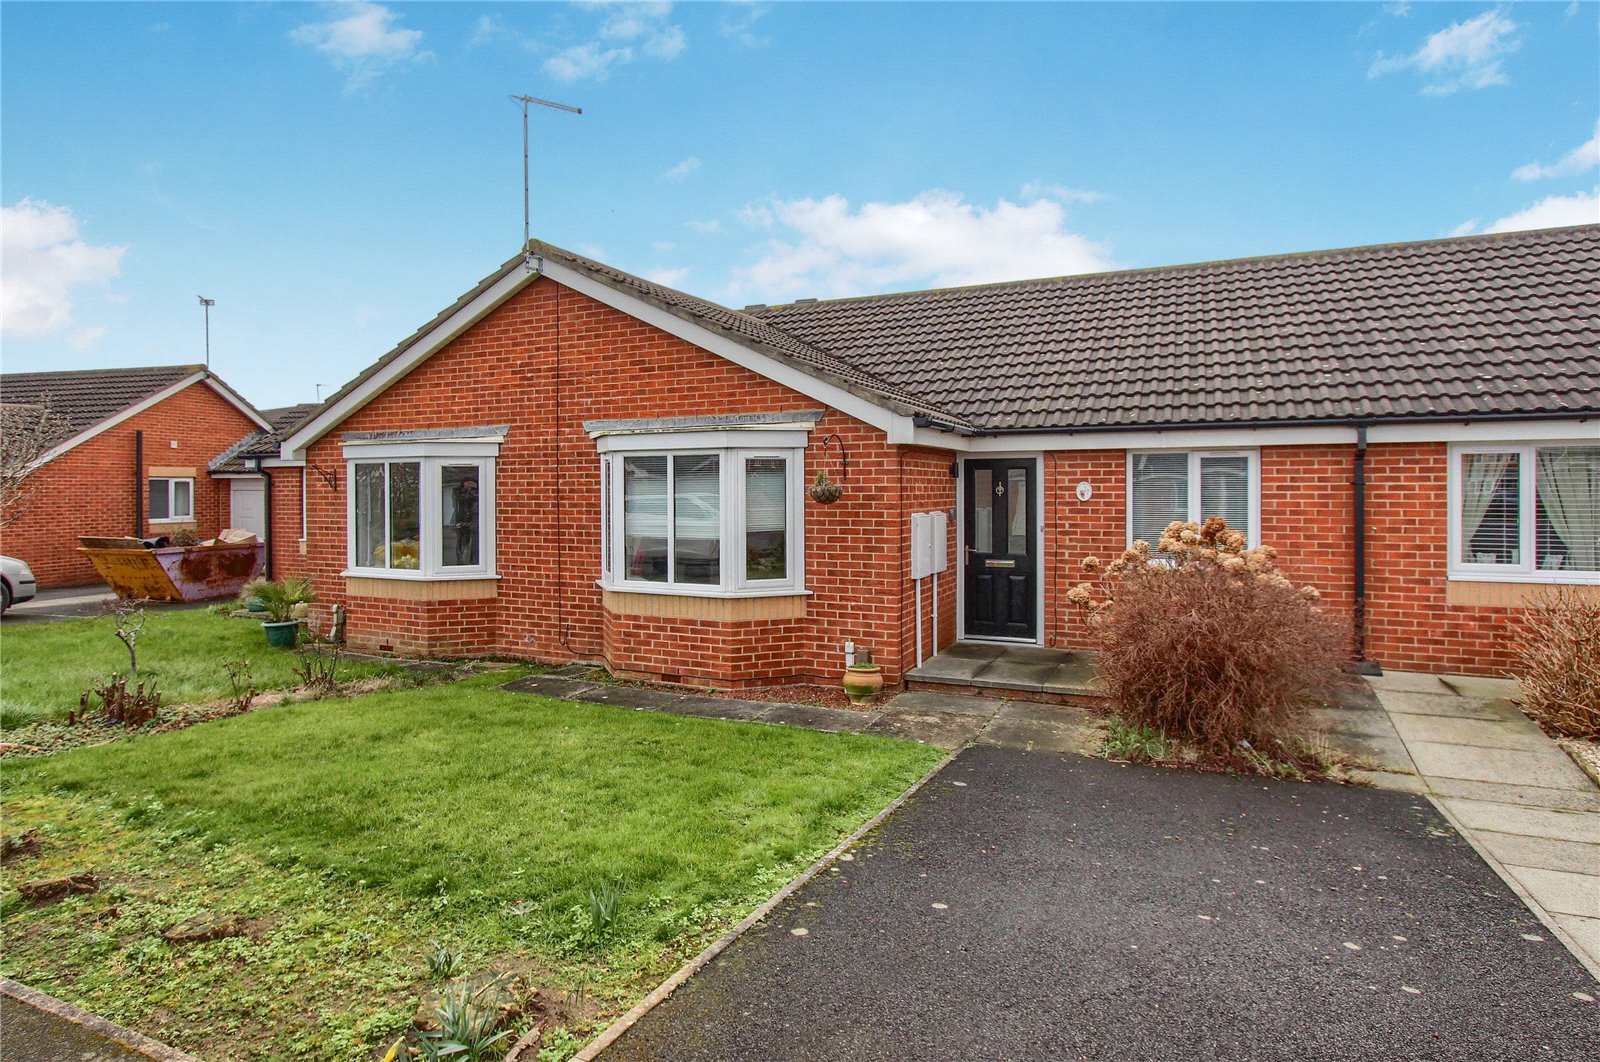 2 bed bungalow for sale in Trevarrian Drive, Redcar 1